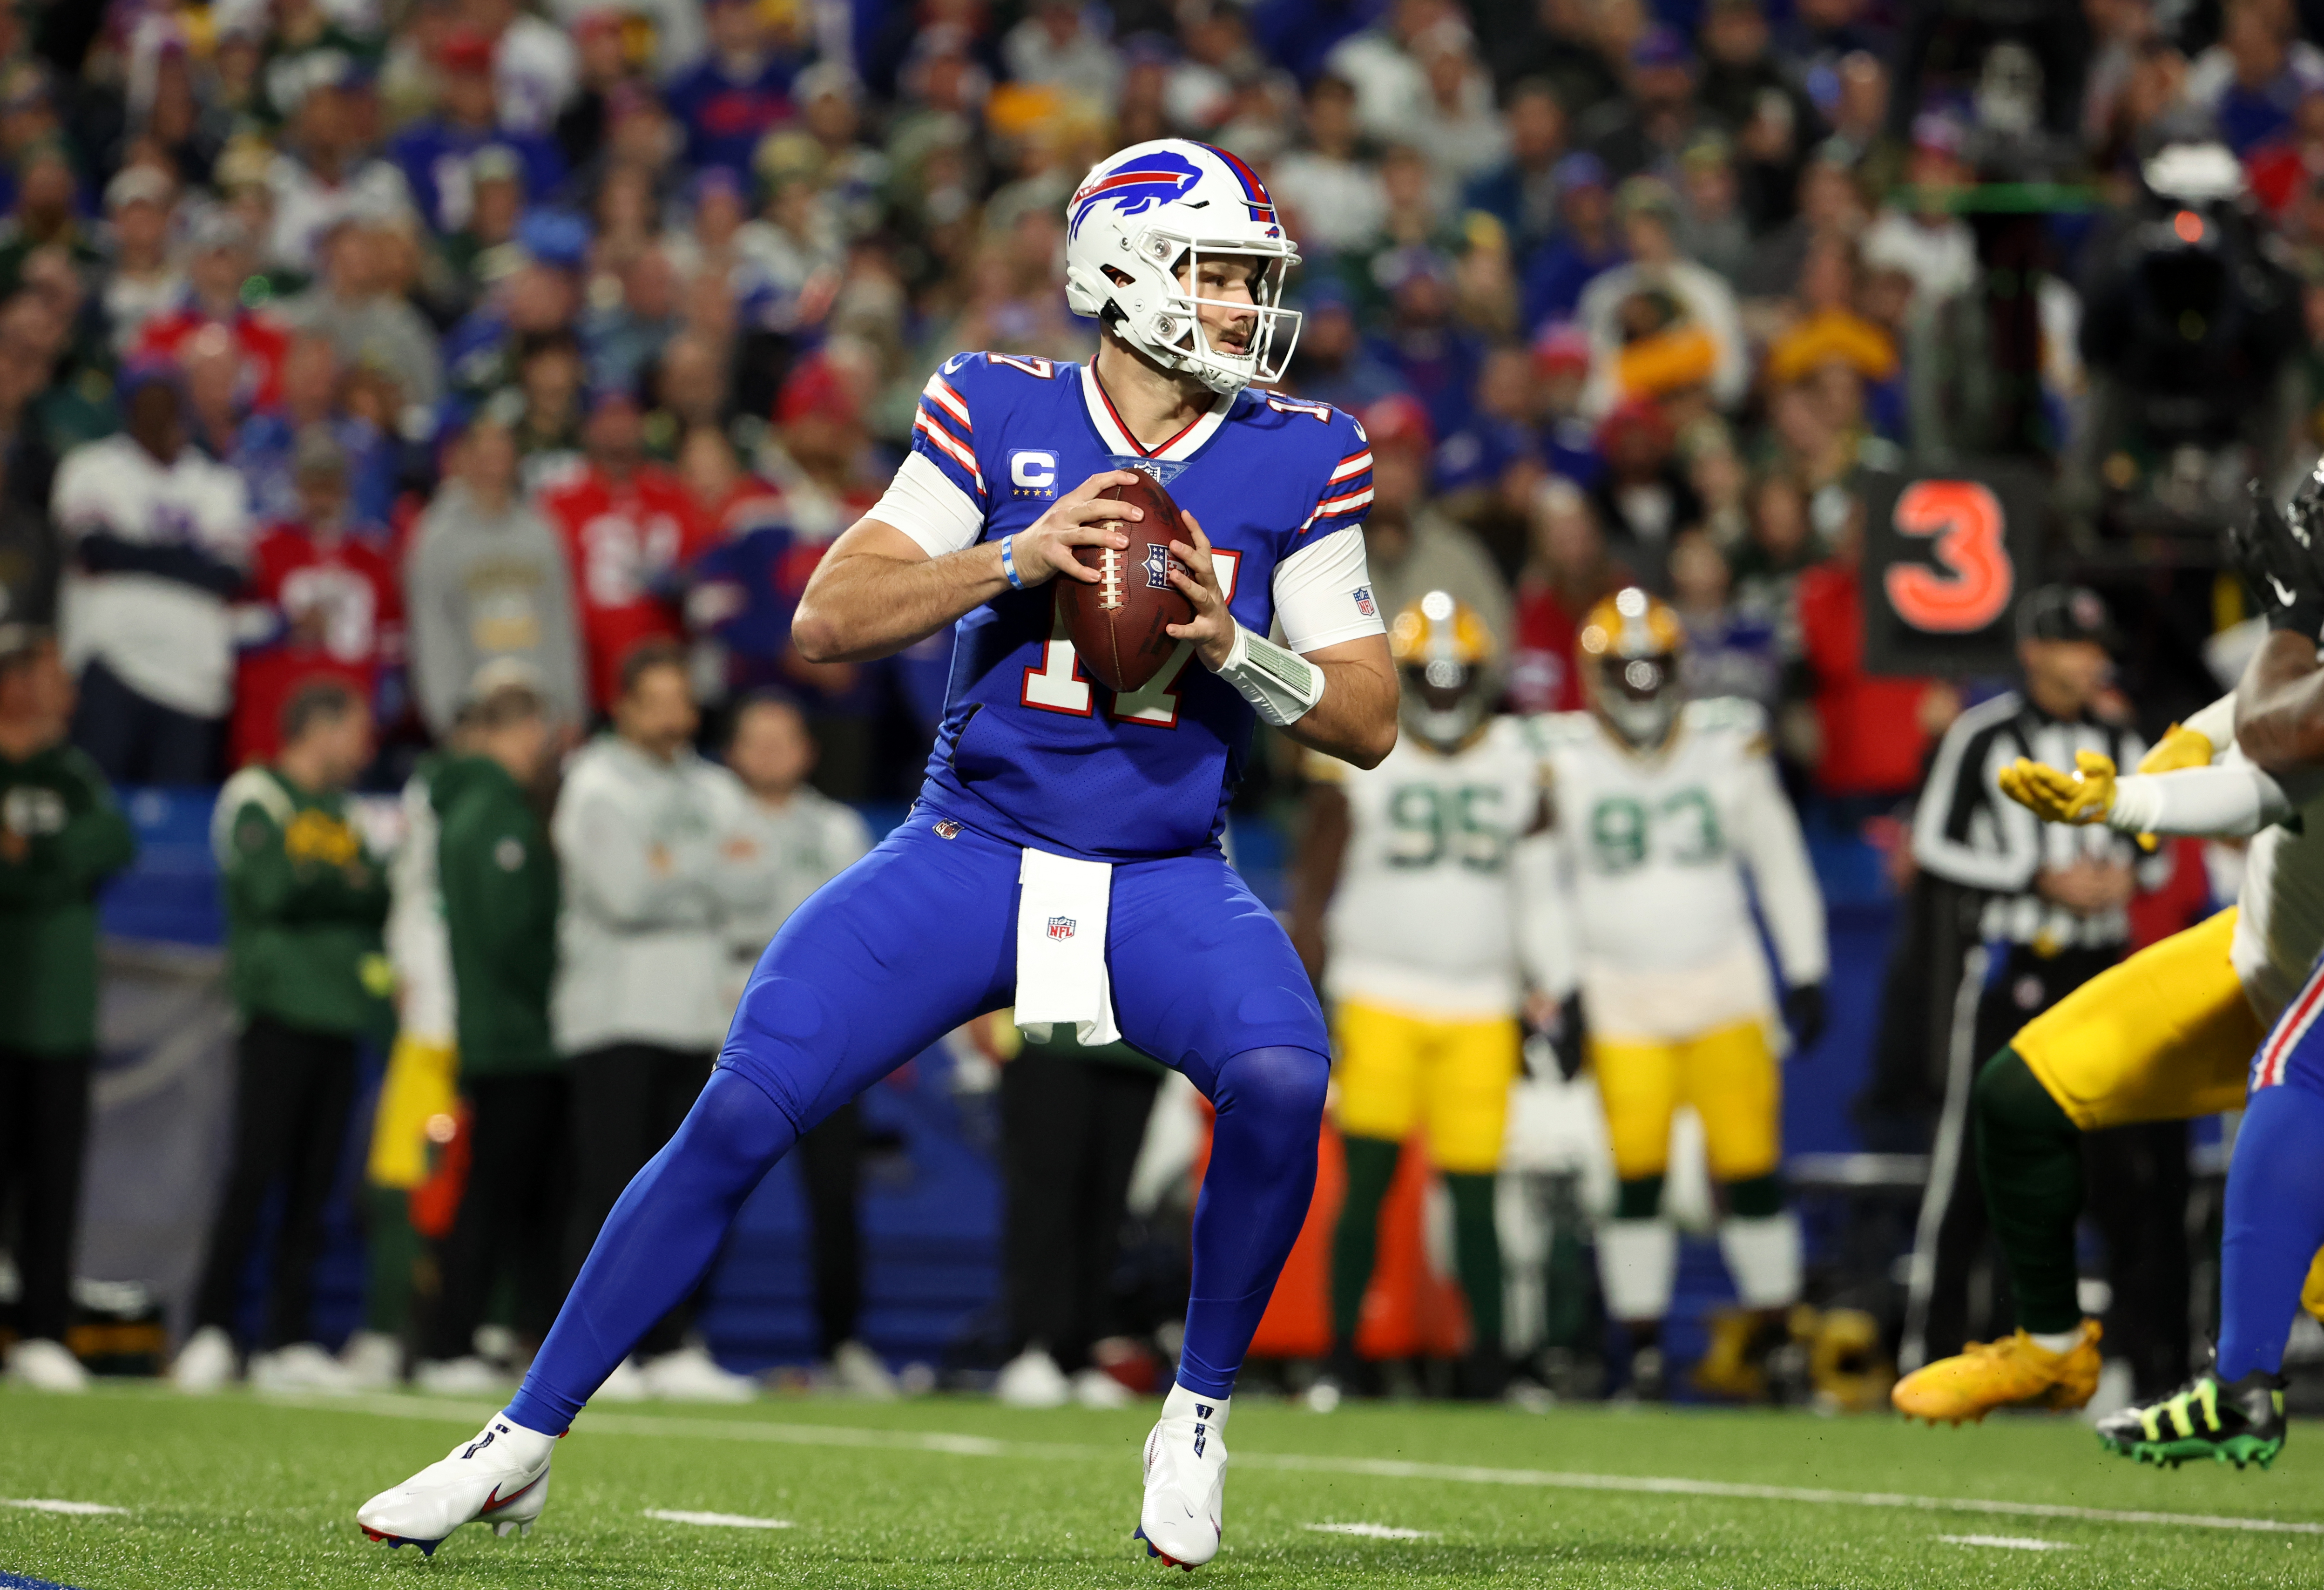 Quarterback Josh Allen of the Buffalo Bills drops back to throw a pass in the game against the Green Bay Packers at Highmark Stadium in Orchard Park, New York, October 30, 2022. /CFP